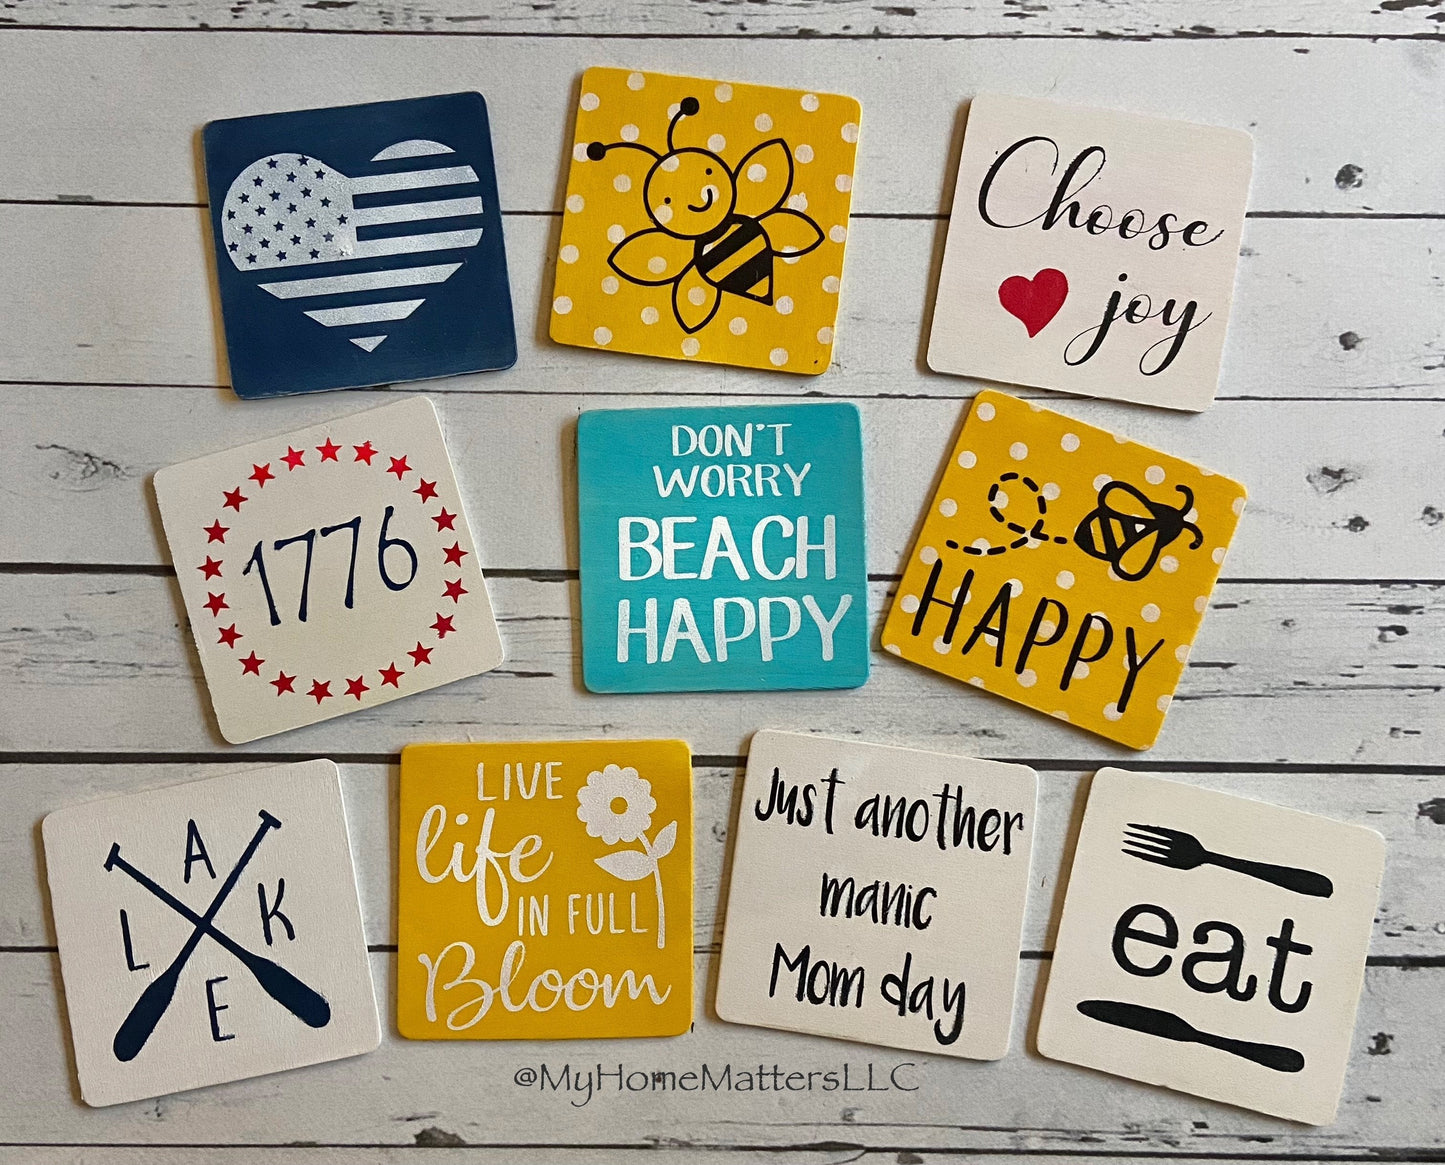 DIY Interchangeable Sign Starter Kits - Celebrate and Appreciate